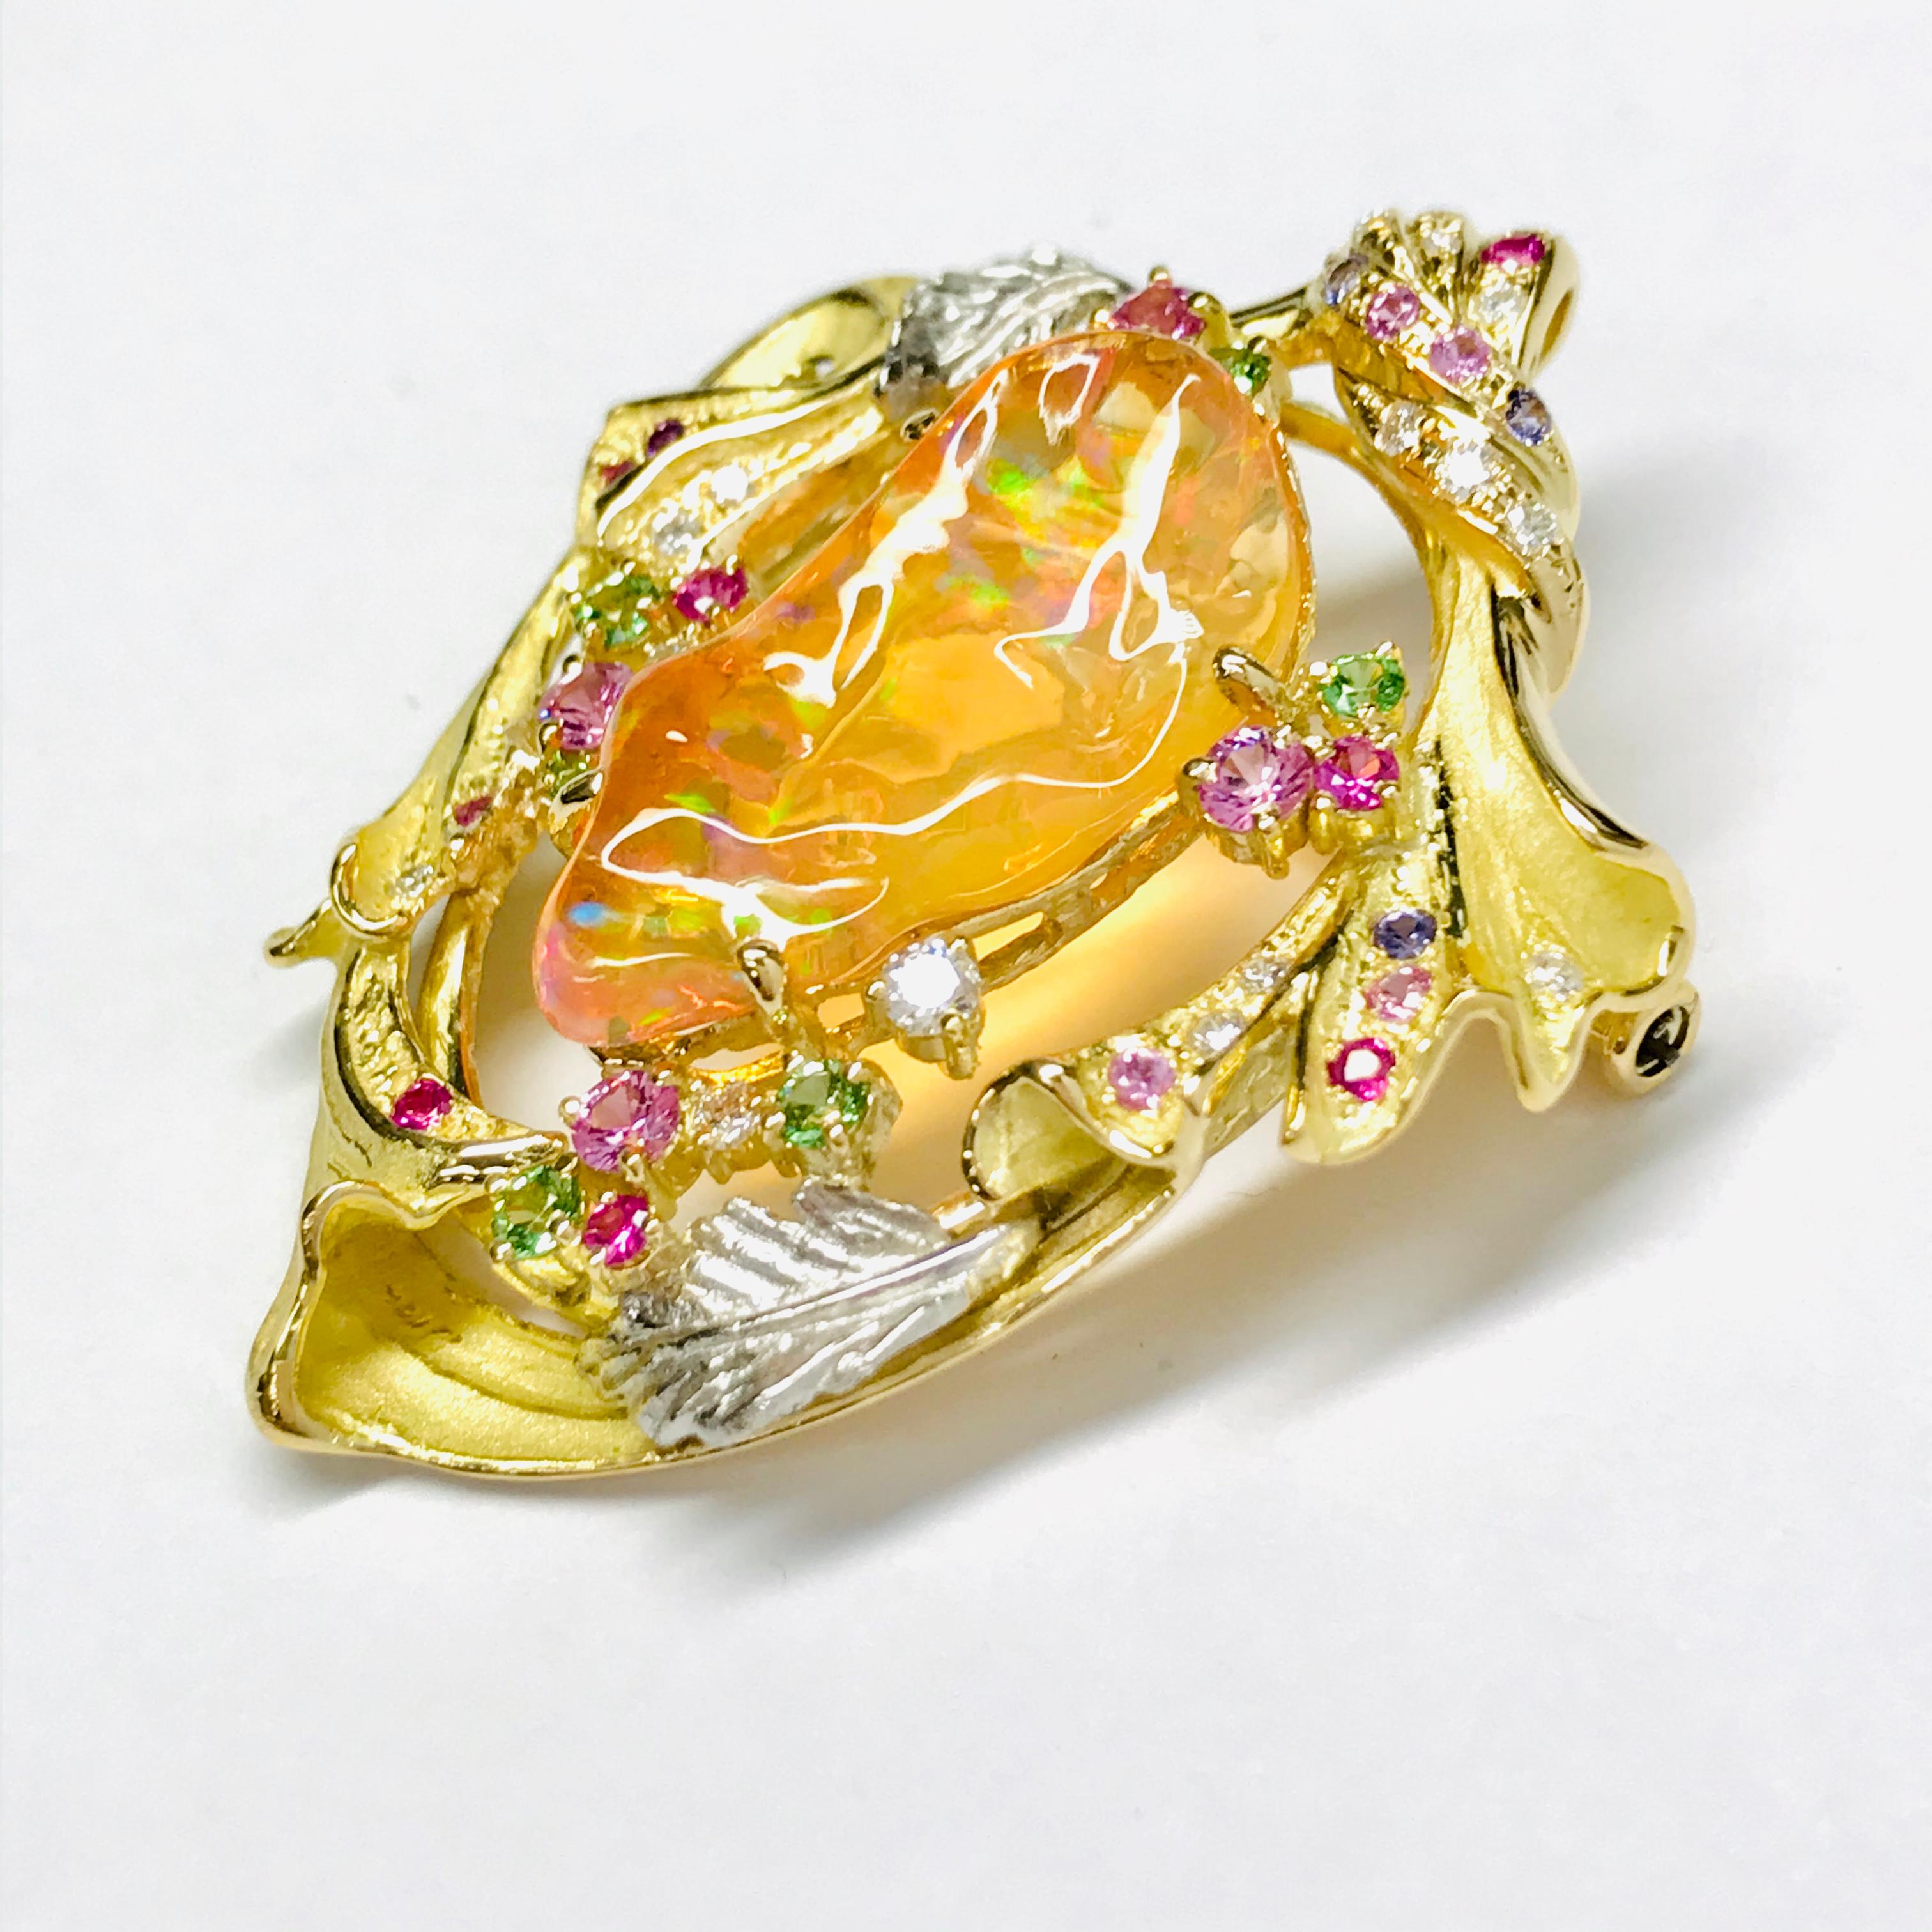 [LIMITED SPECIAL OFFER ITEM]
The list price includes the Japanese Sales Tax.
All buyers outside of Japan will receive -10% tax exemption from the list price. 
Please inquire for details.

[Product Details]
K18YG / PT900
FIRE OPAL 8.65ct 
COLOR